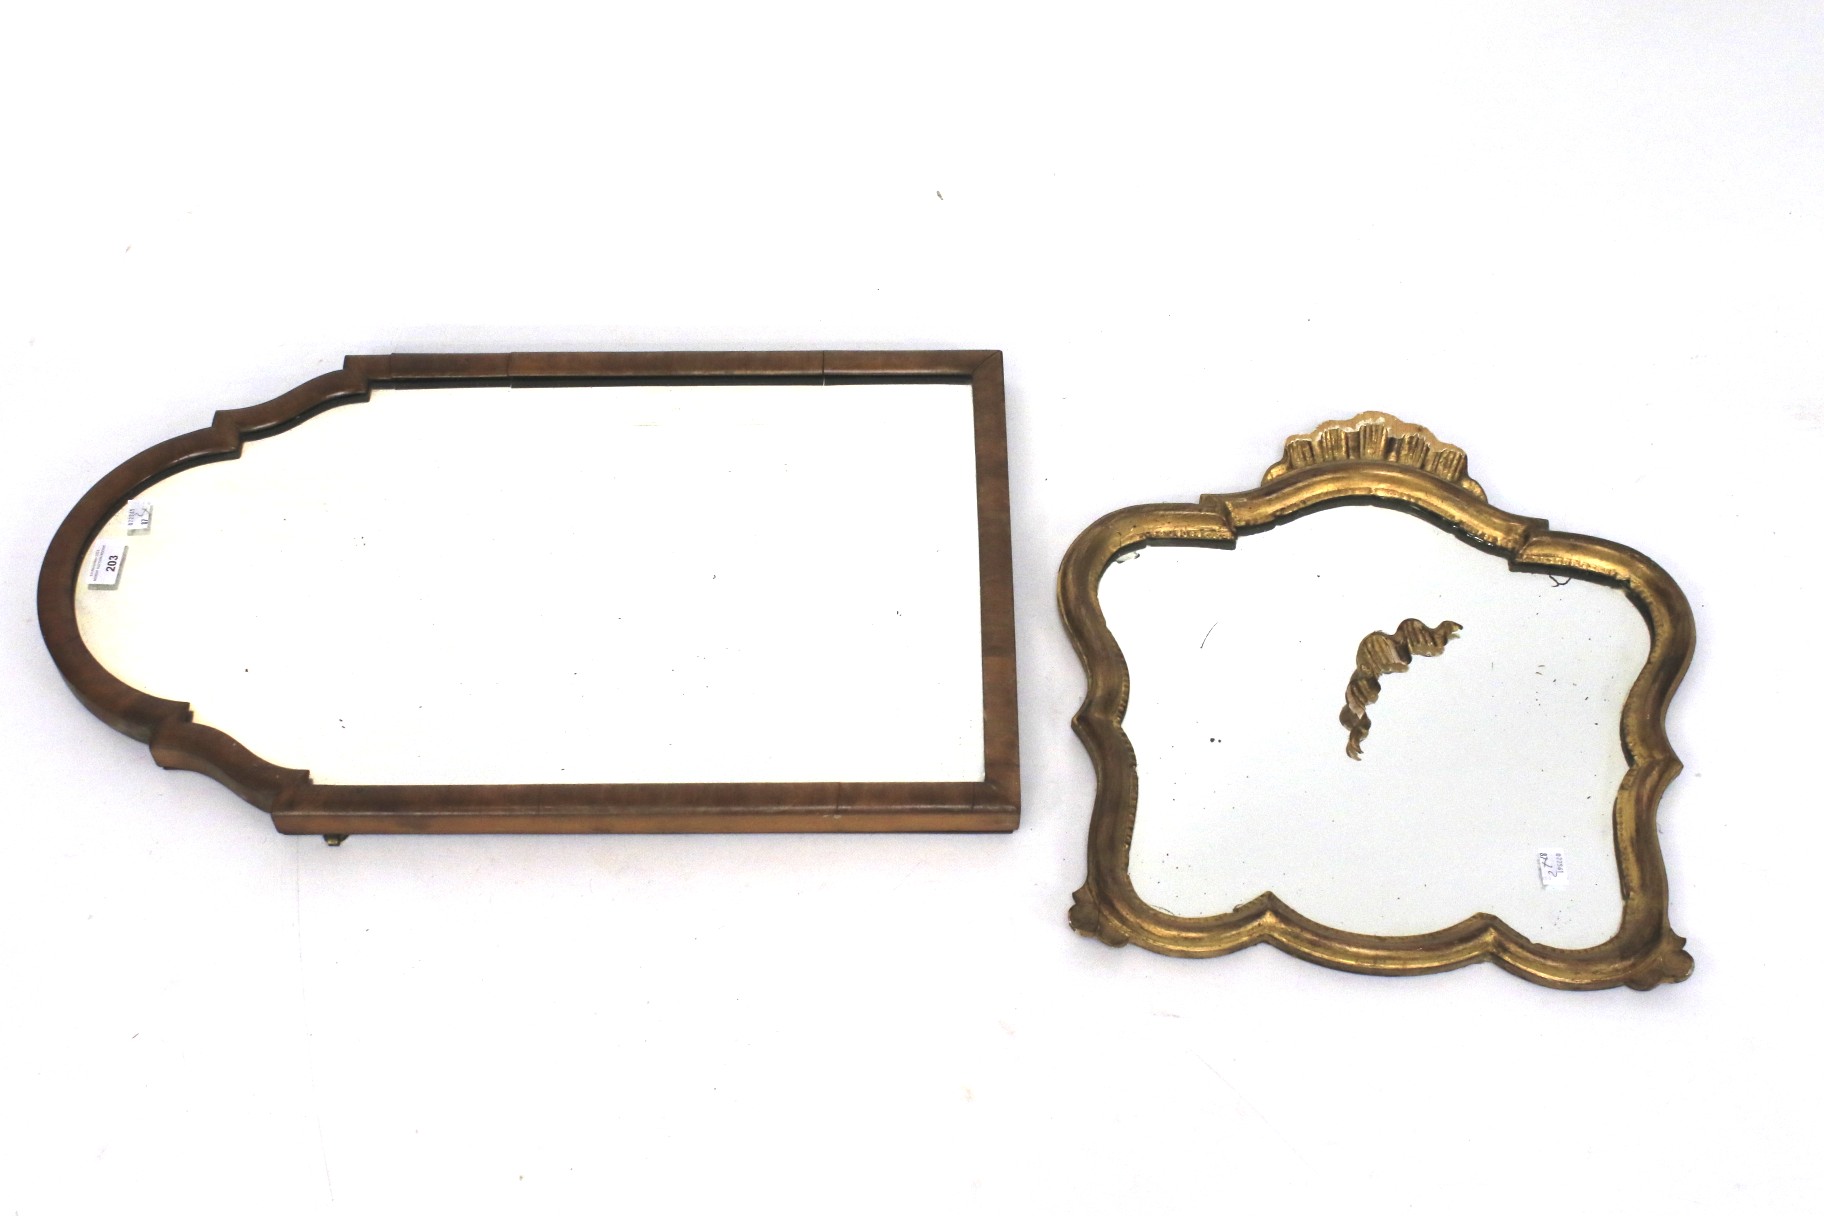 Two 19th century wall mirrors.